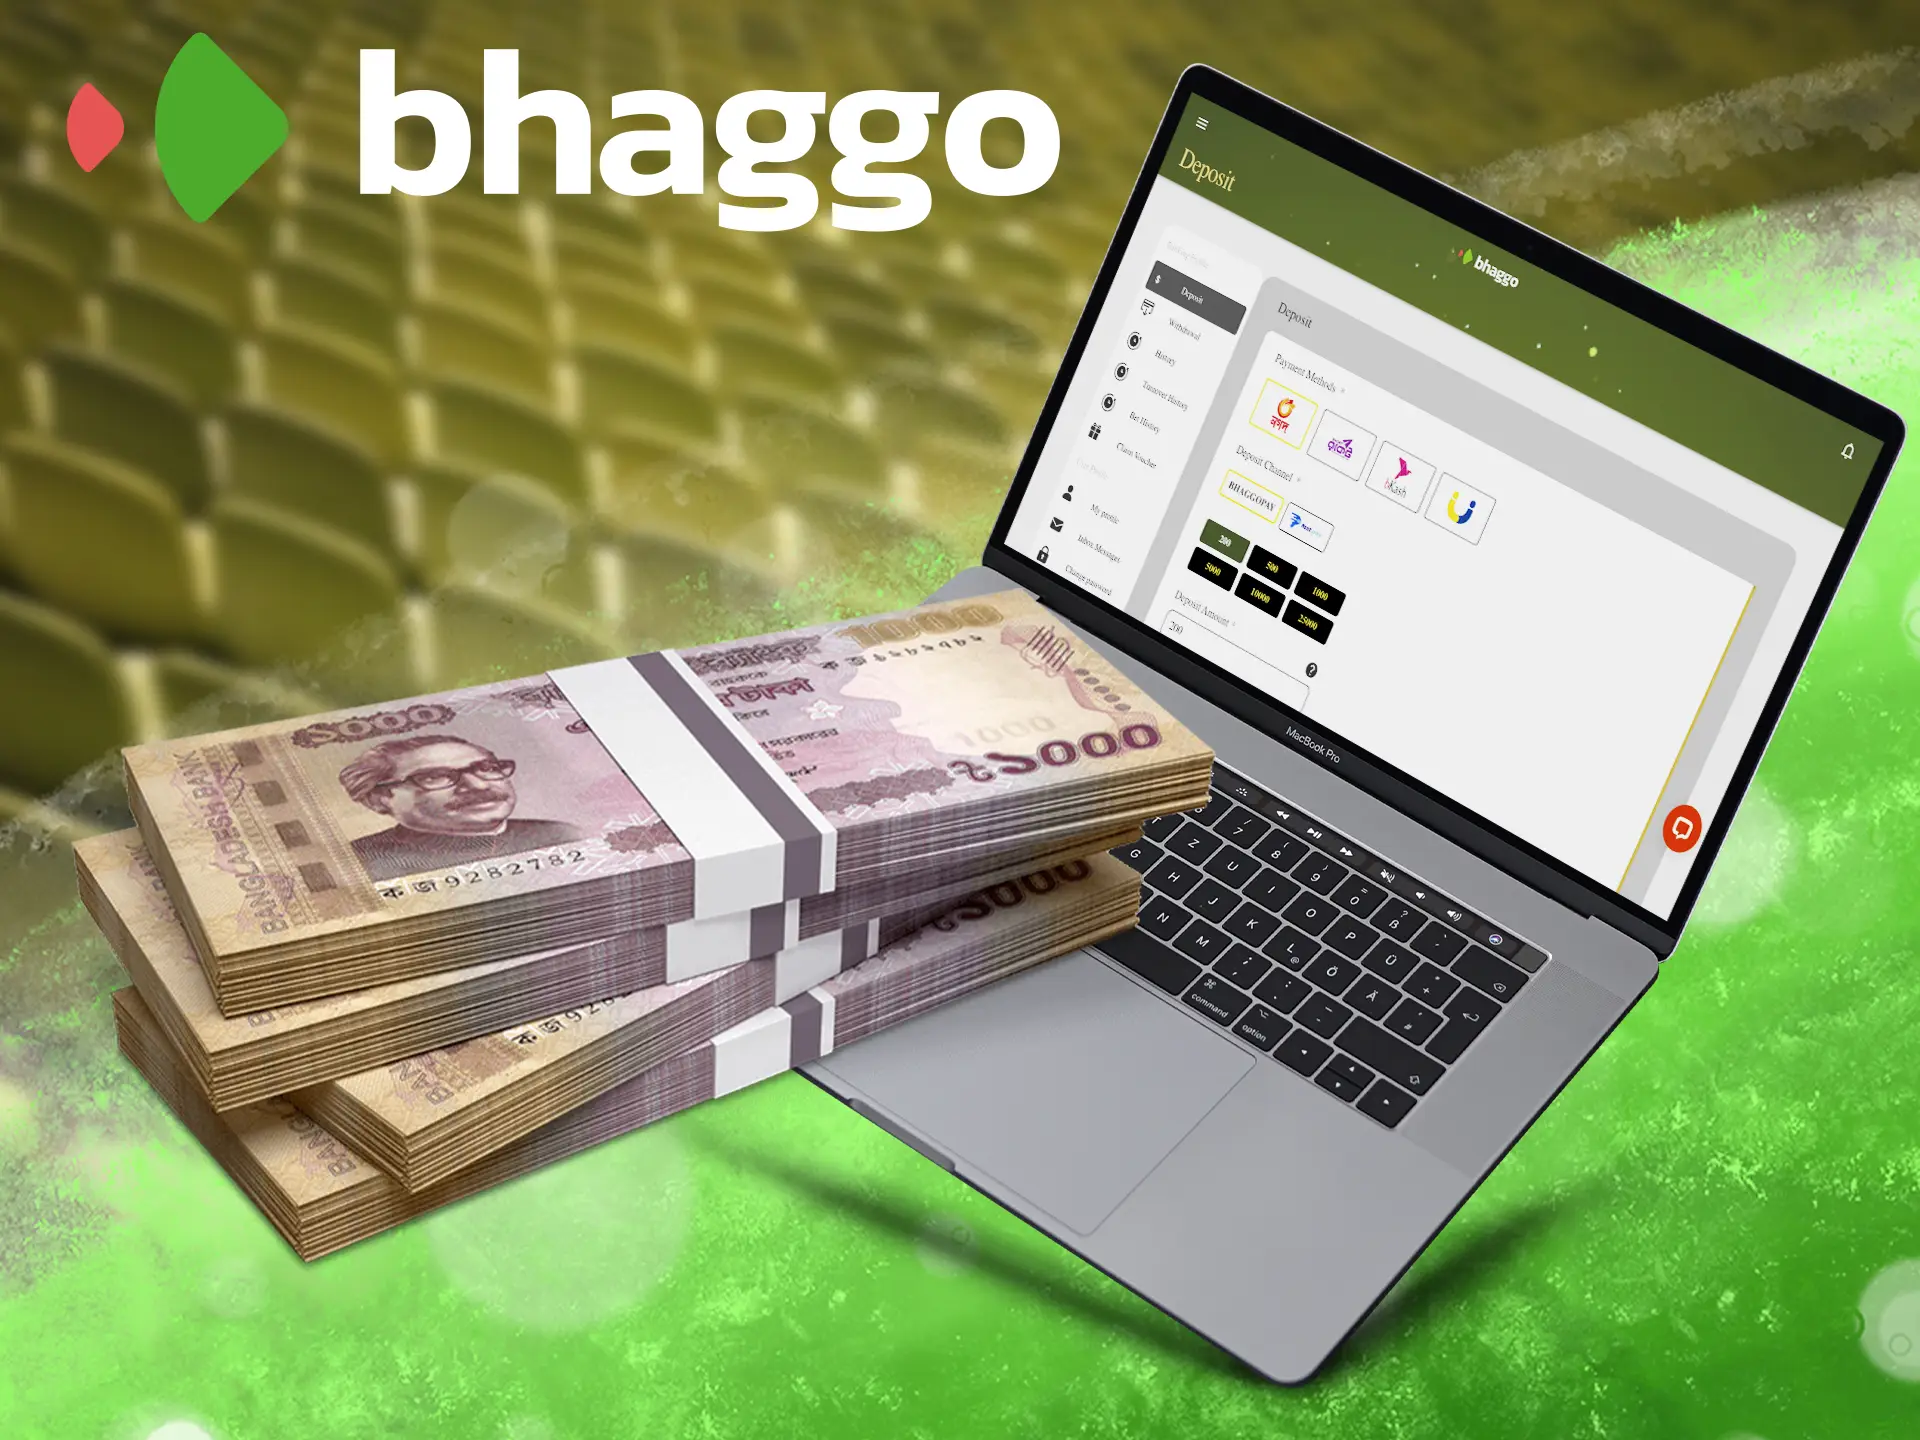 Our simple guide will help players from Bangladesh to fund money to their accounts and start betting in Bhaggo.